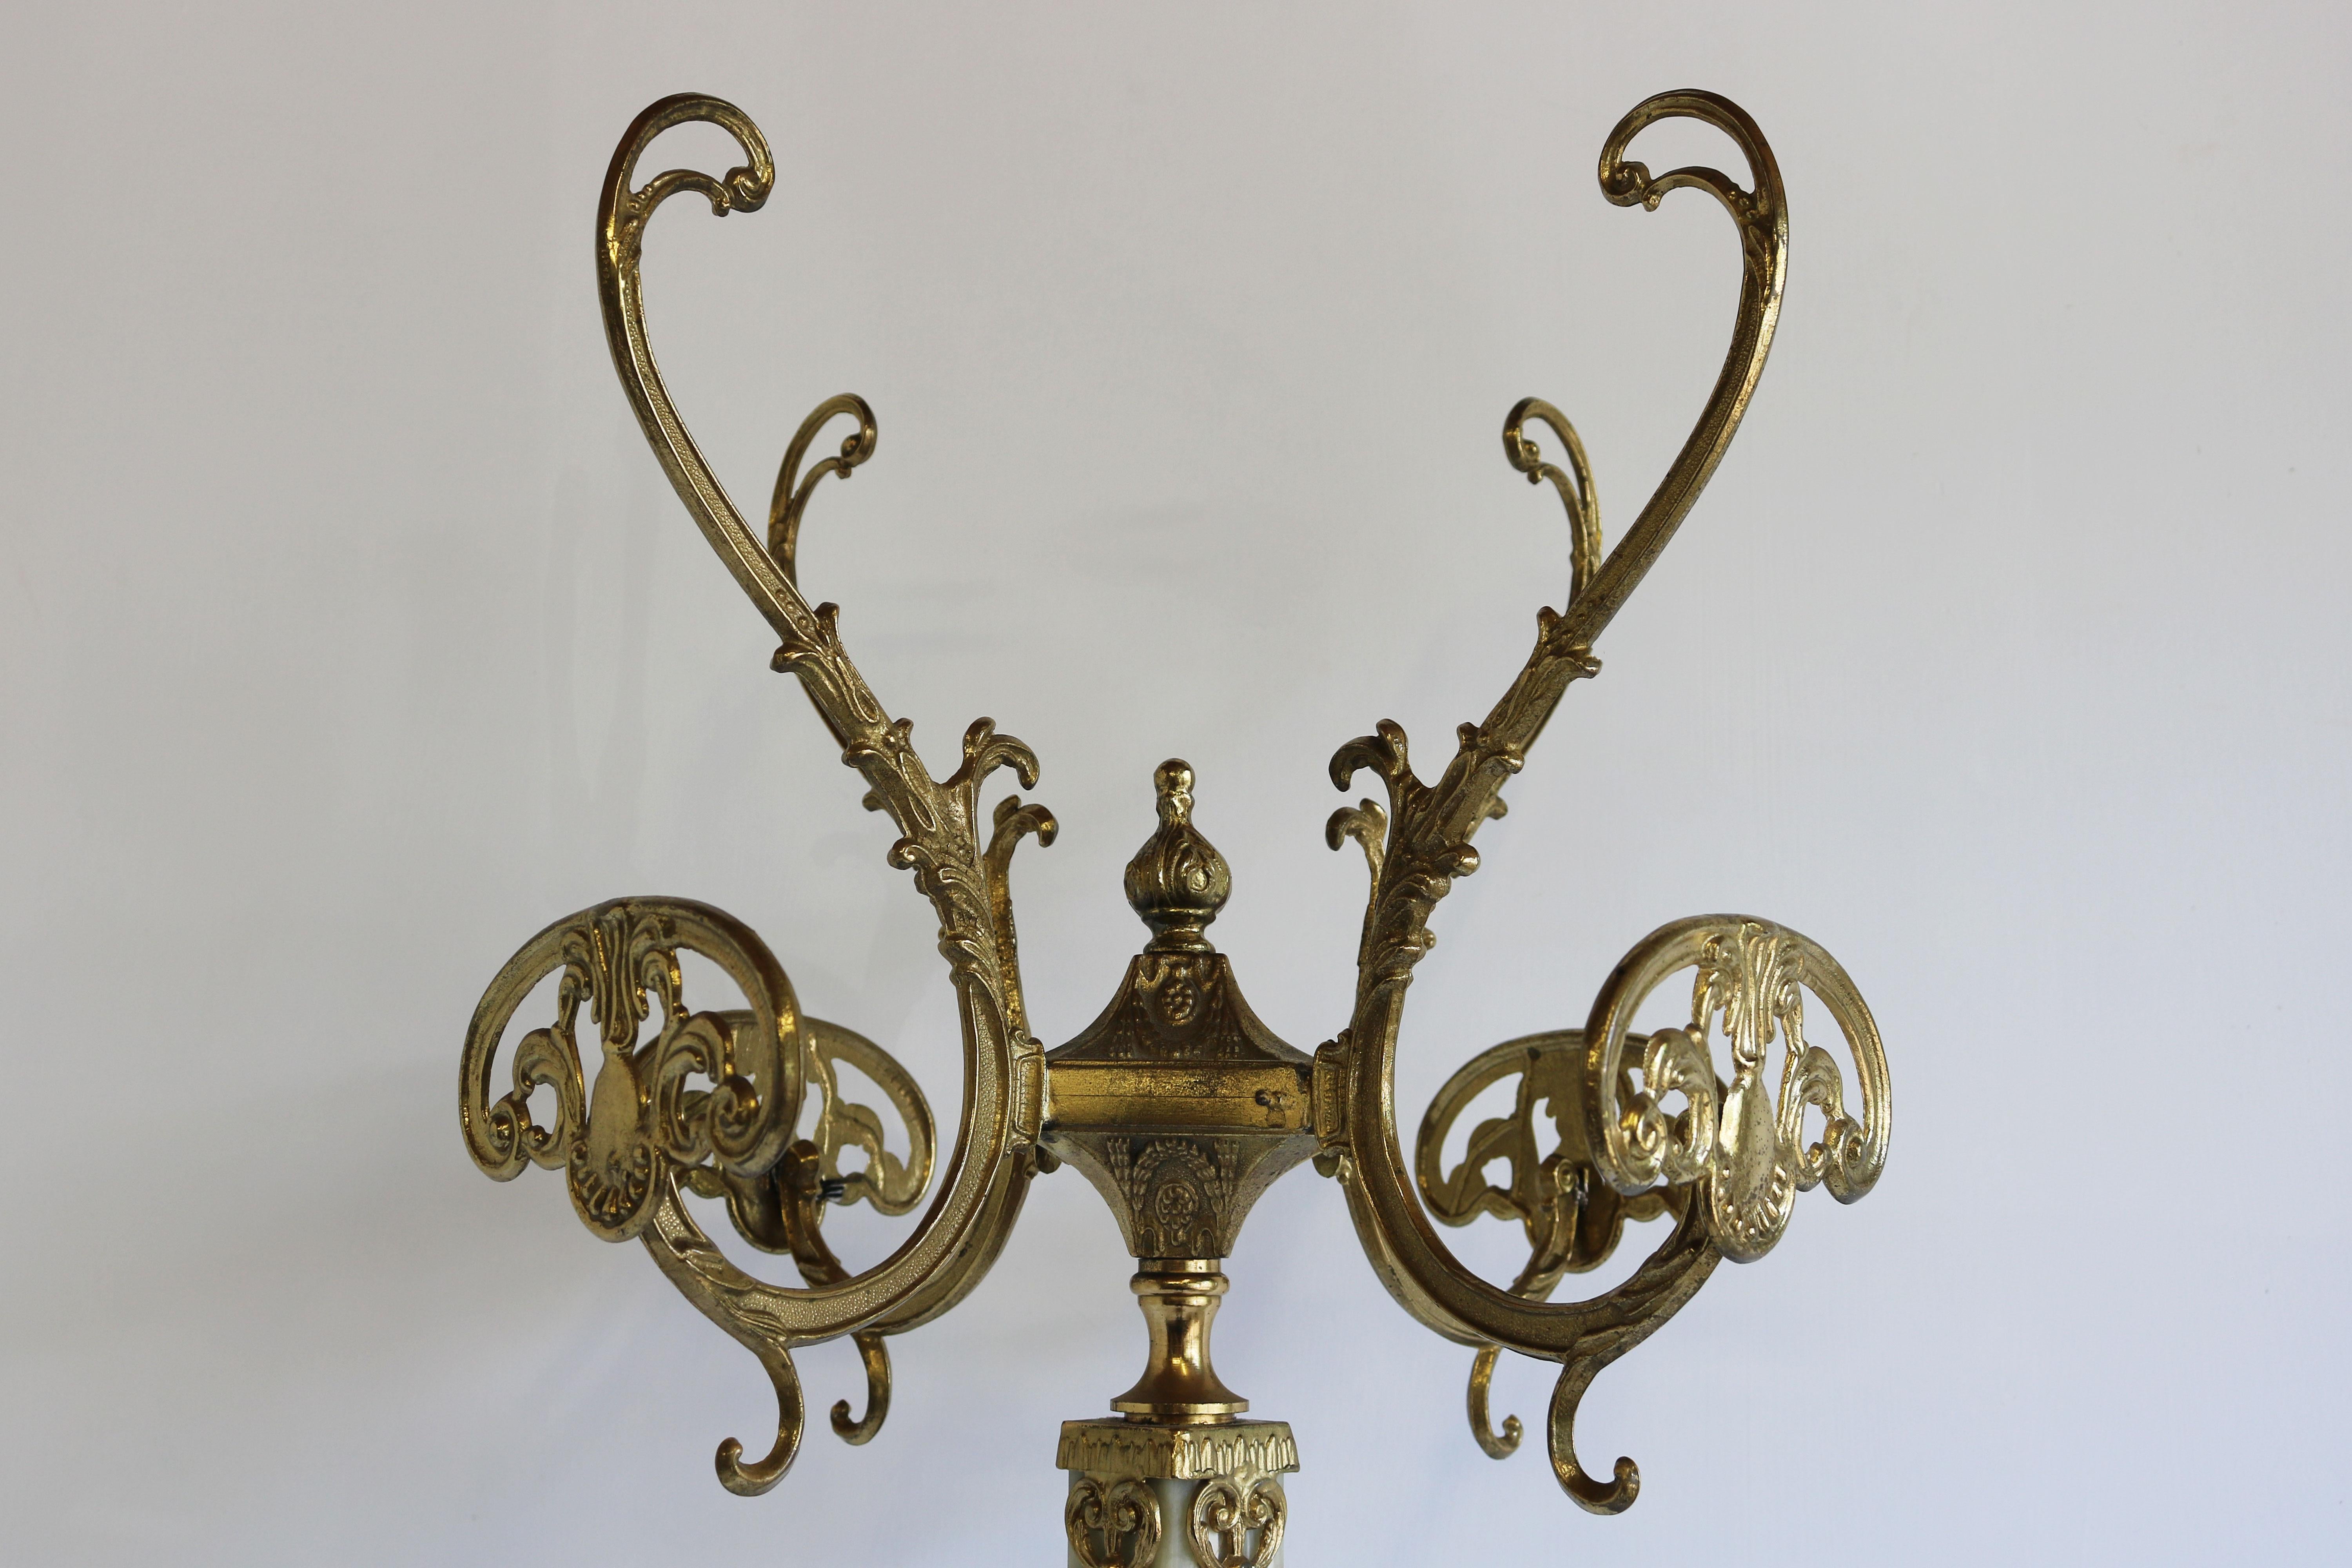 Impressive & luxurious! This marvelous Italian ornate brass coat rack with base decorated Brass details and Onyx marble. Marvelous mid-century design in classical / Hollywood regency style. 
Very nice sturdy quality with amazing details as the